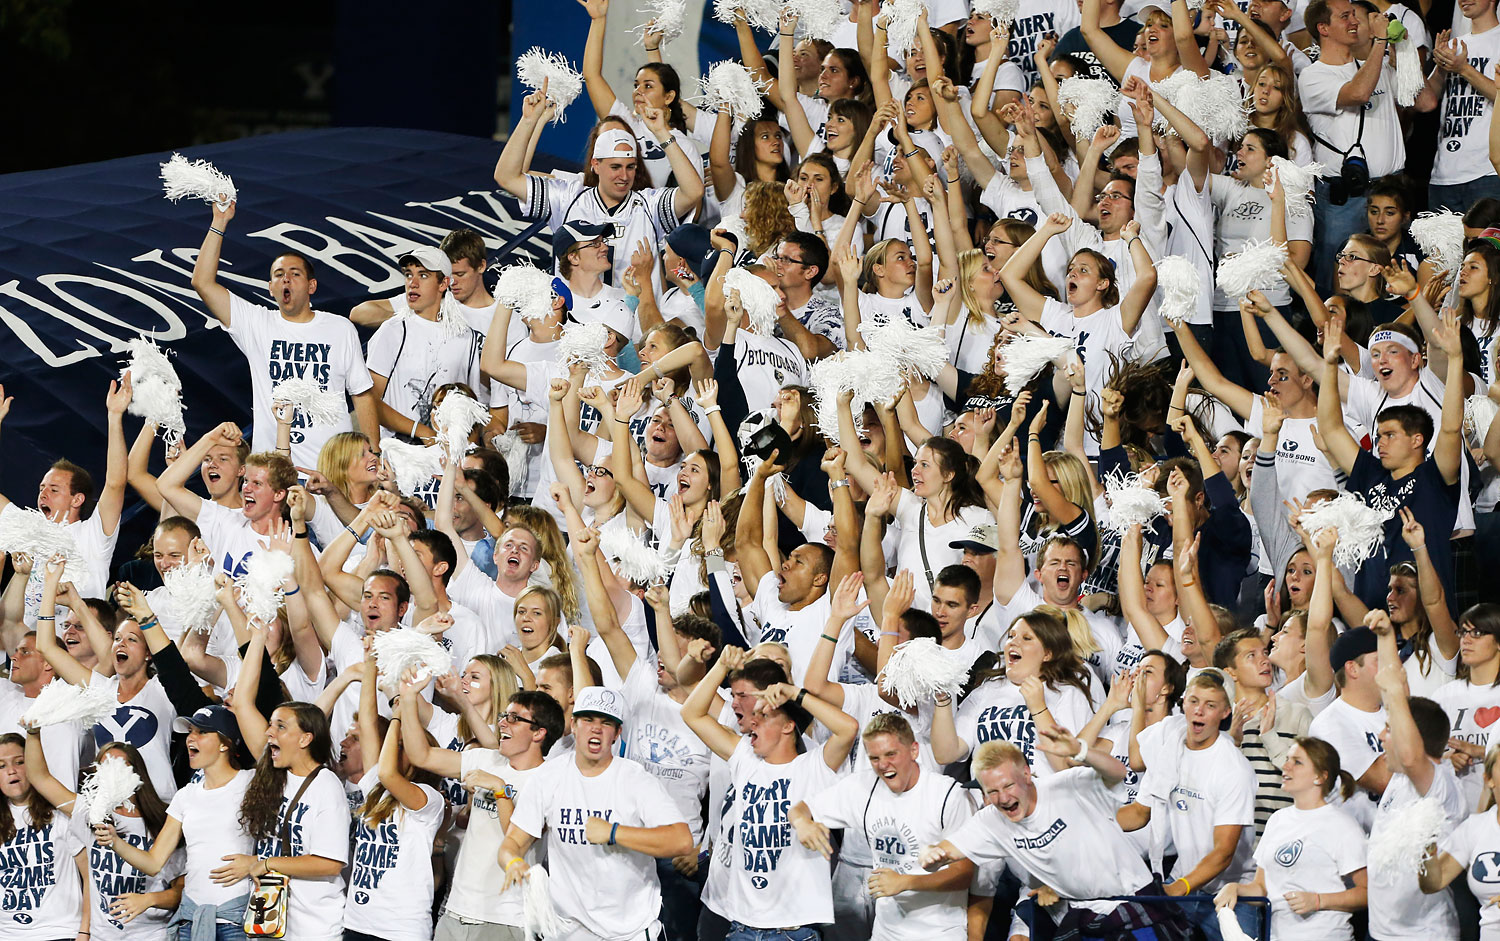 BYU fans cheer during a game against Washington State in 2012 in Provo, Utah. (George Frey—Getty Images)